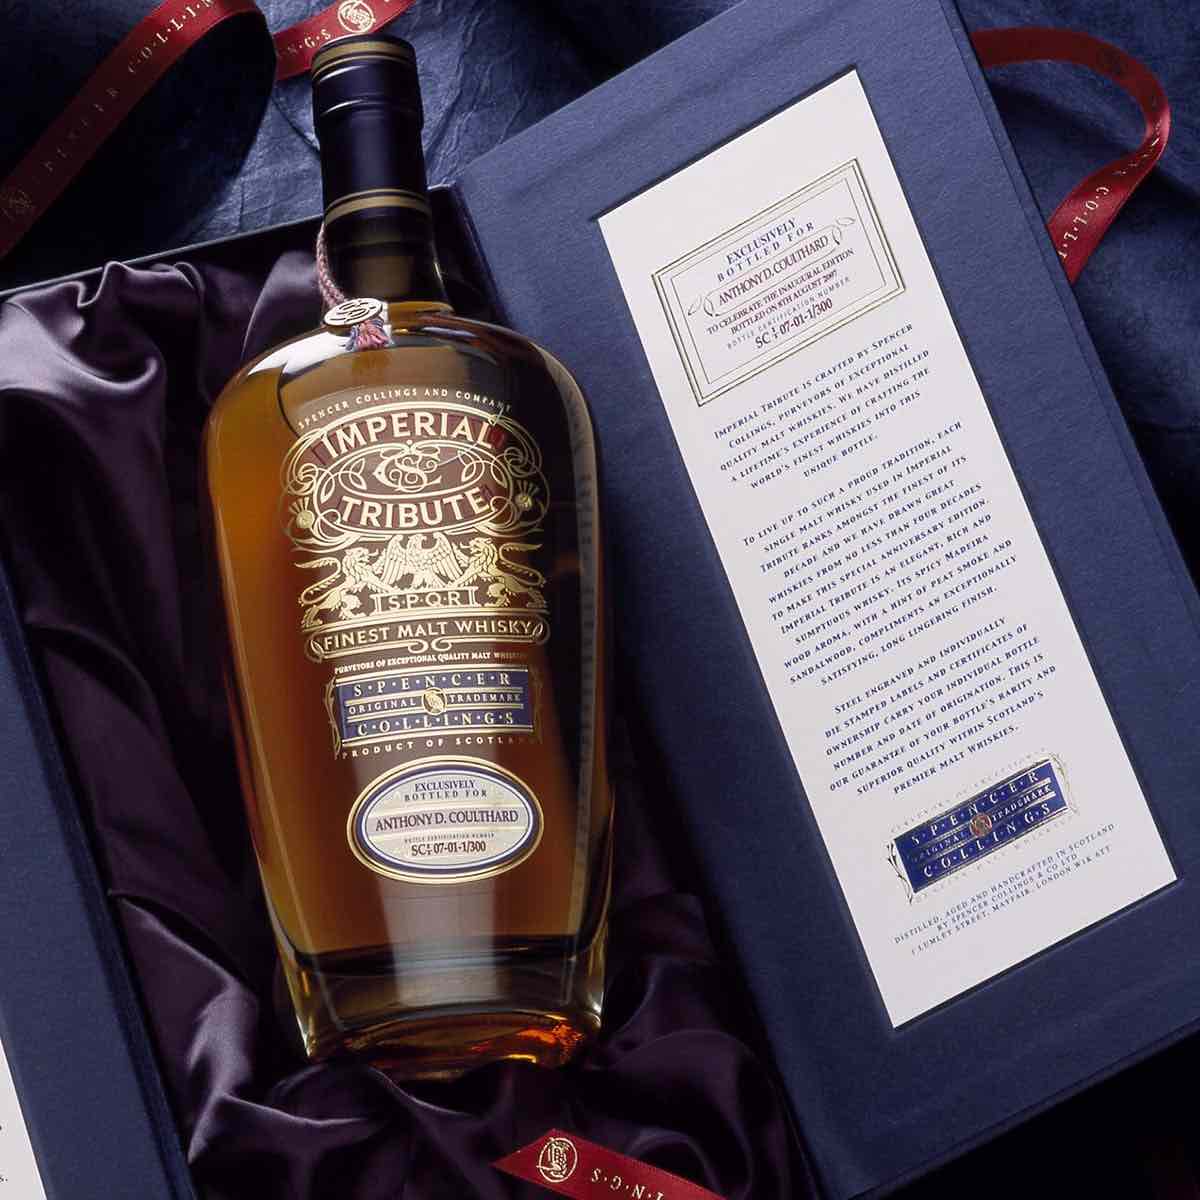 Imperial Tribute, the best unusual whisky gift you can buy